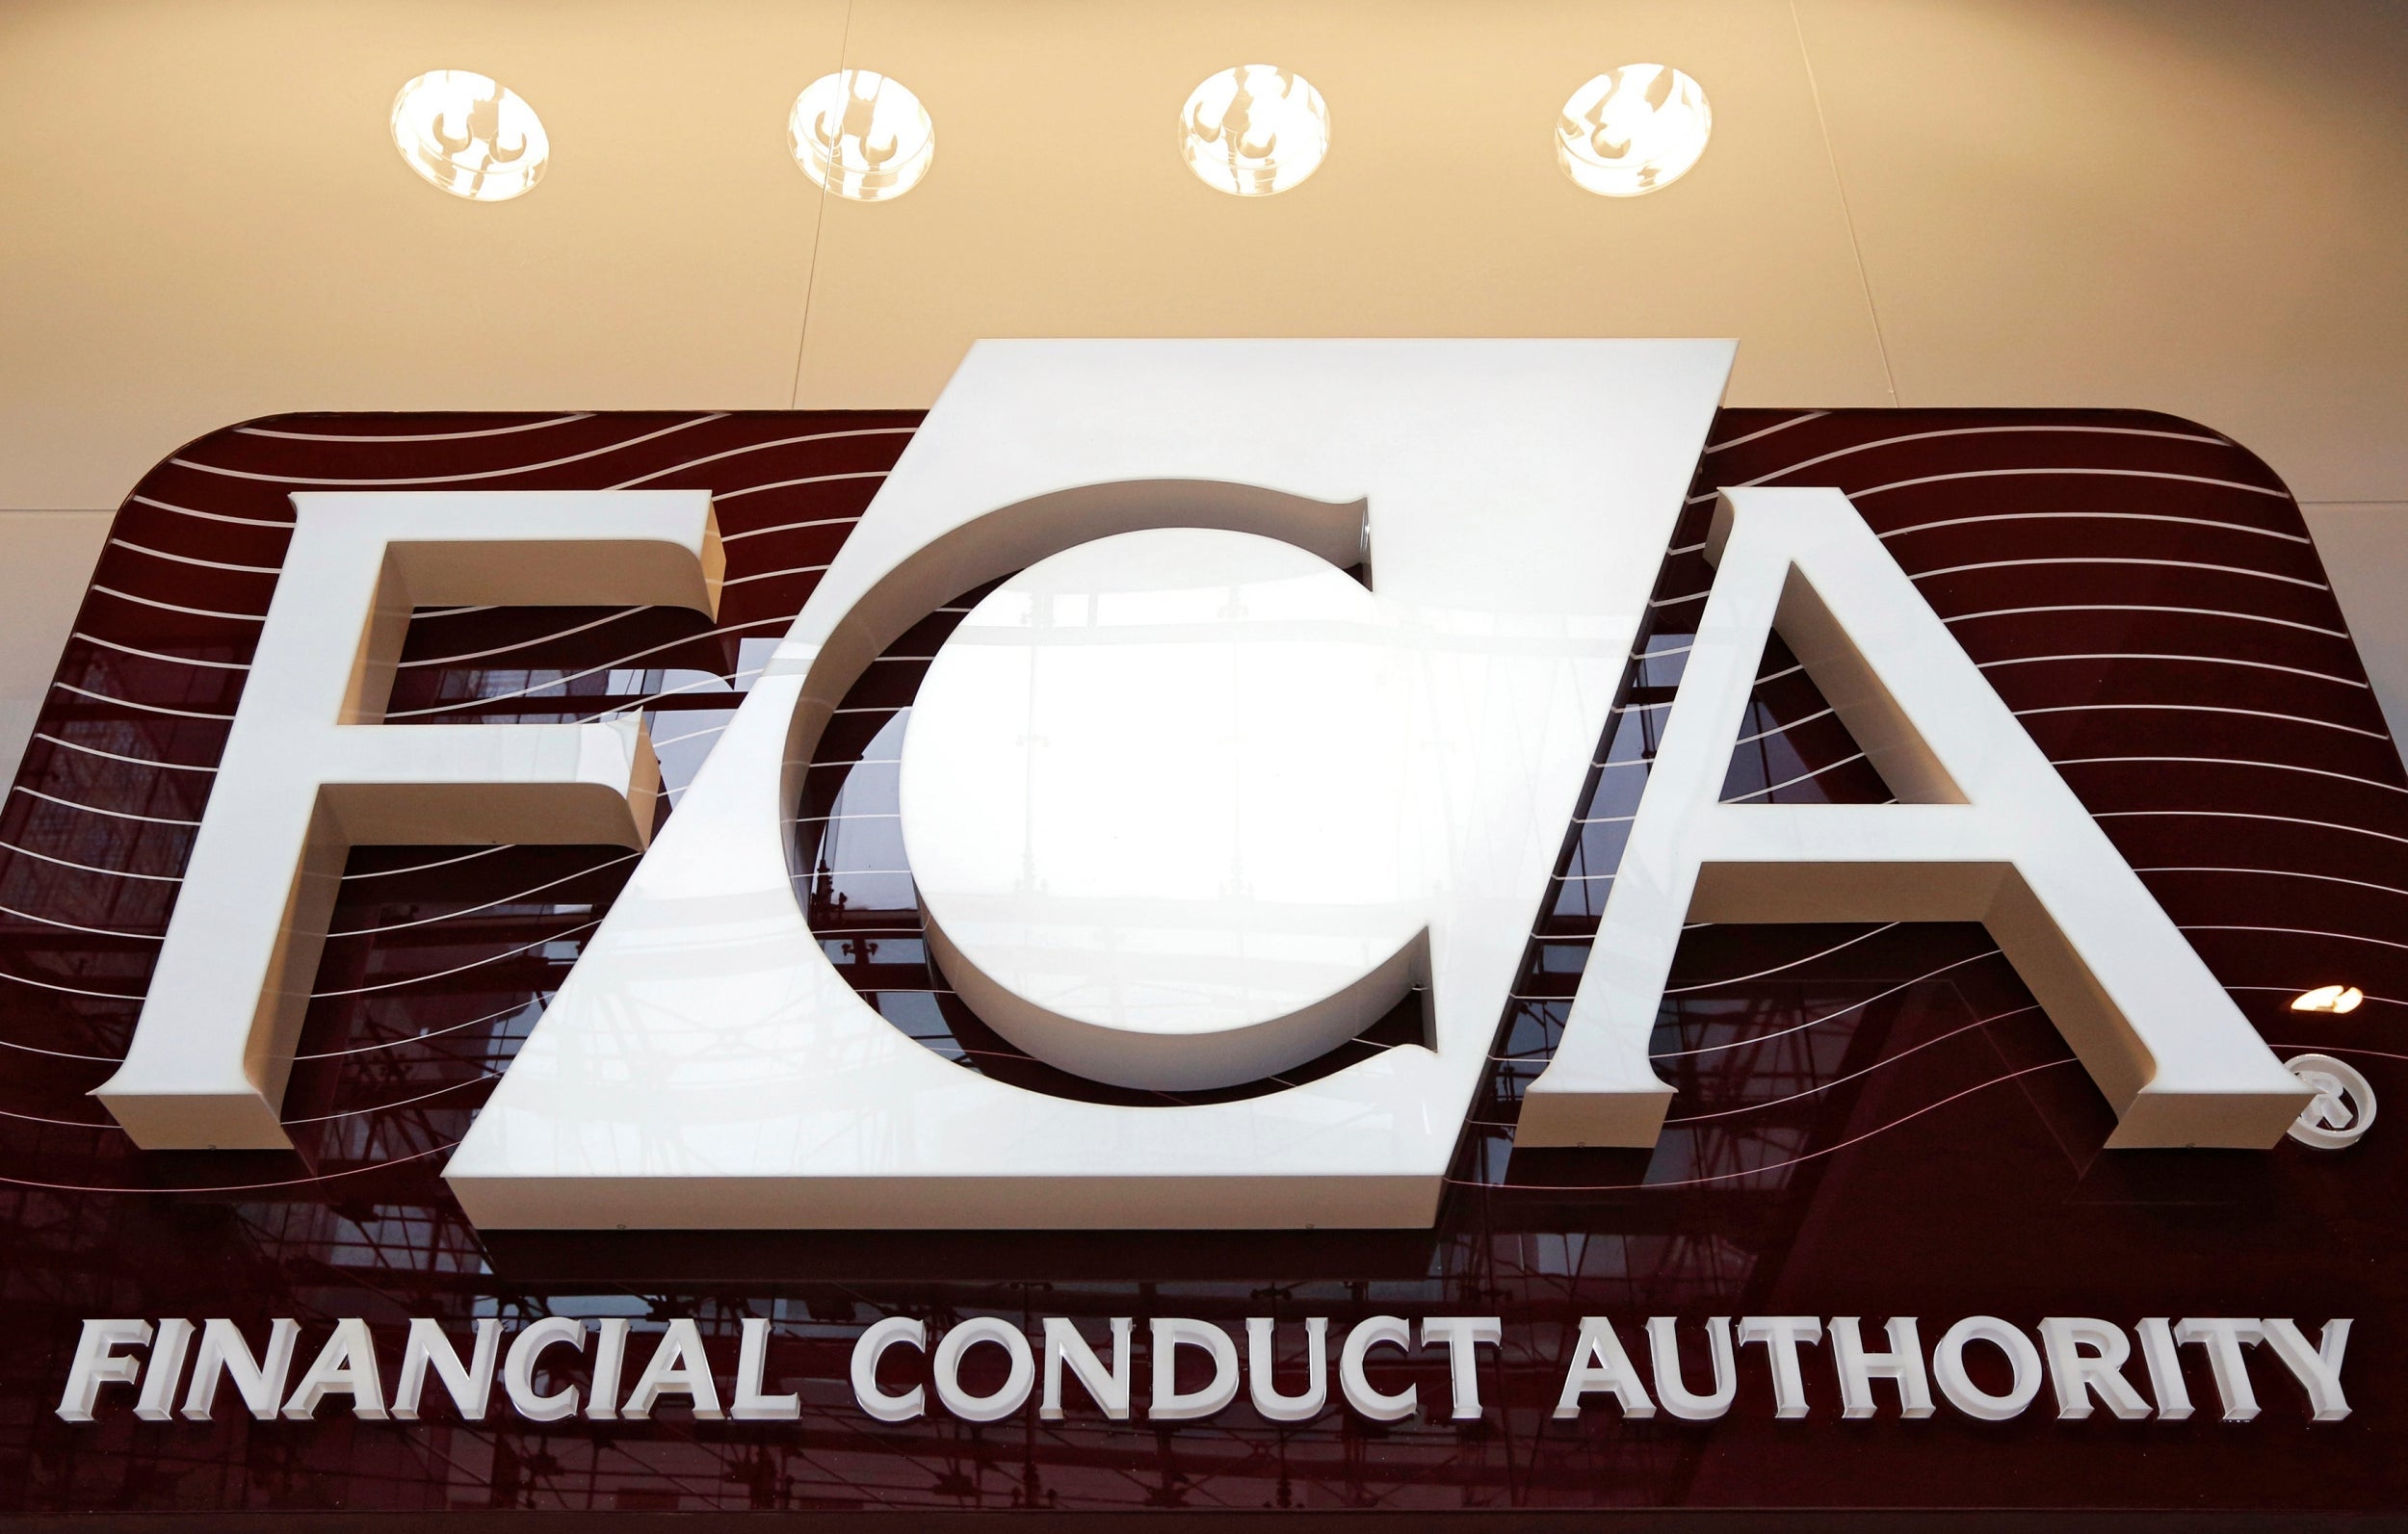 ‘The FCA will seek to put cases before the court on an agreed basis with the insurers concerned in order to get the fastest possible judgement’